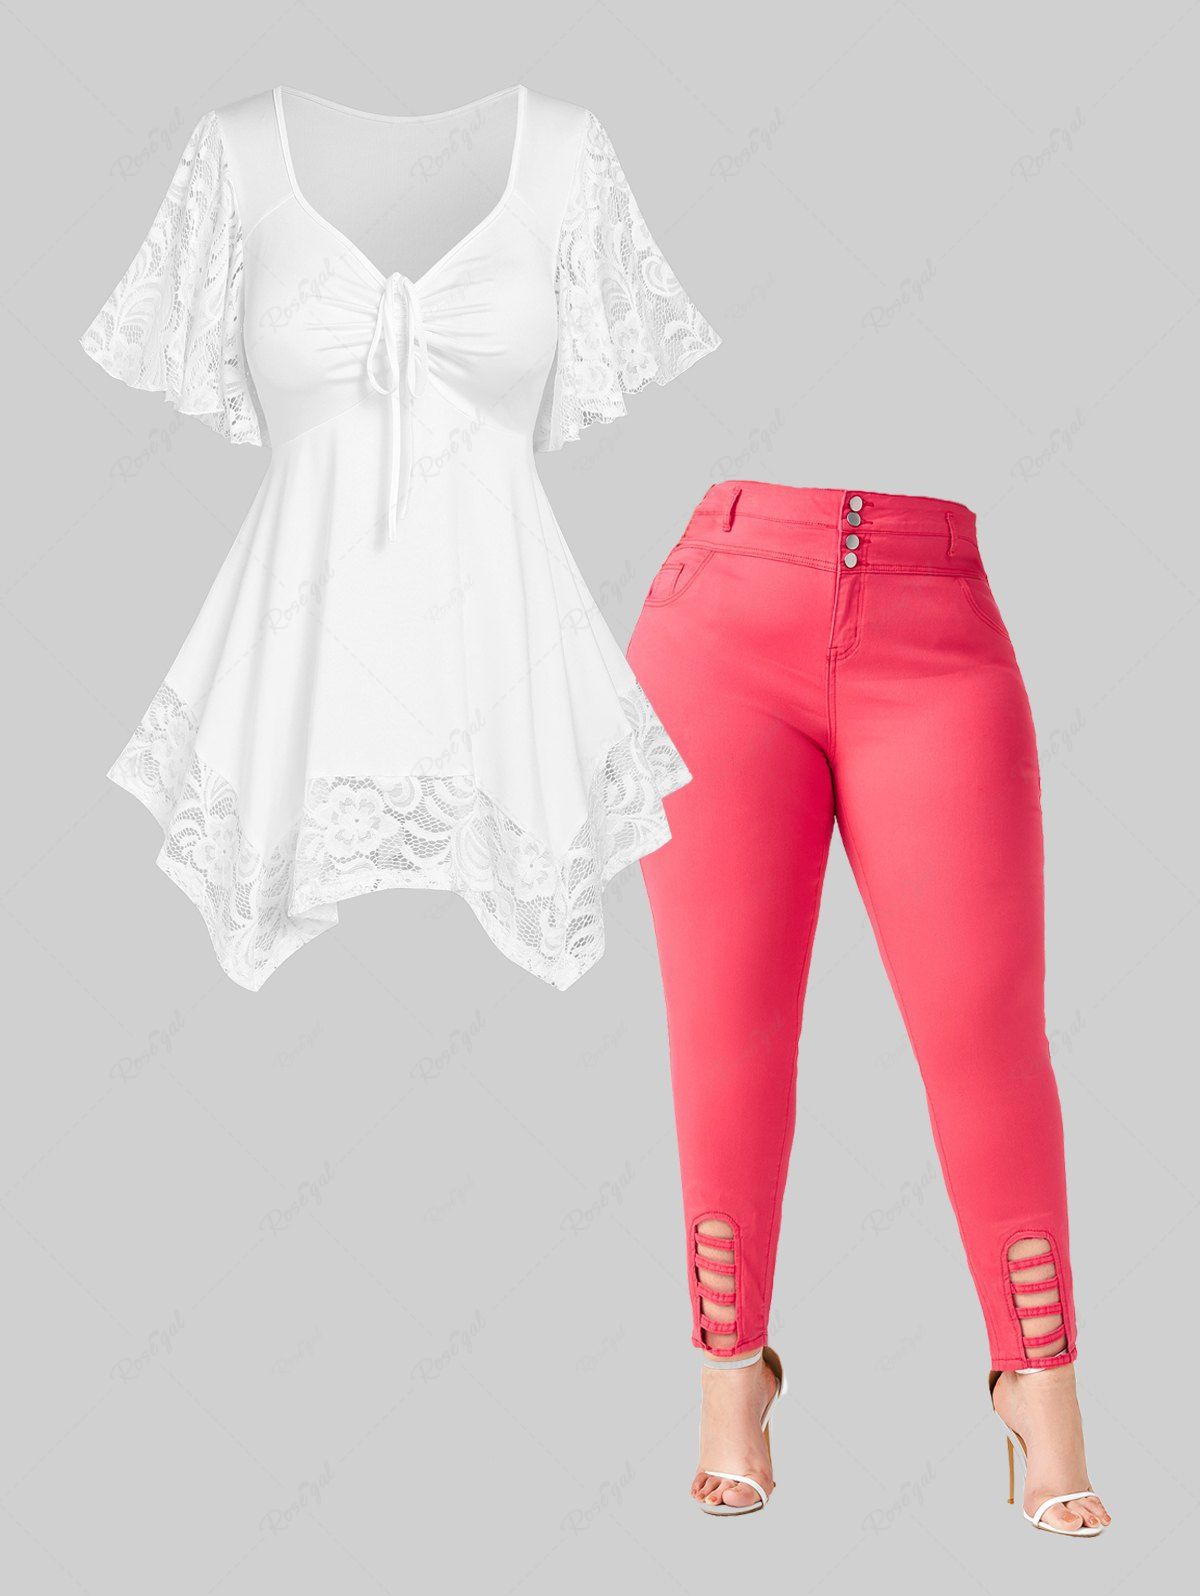 Affordable Flower Lace Sleeve Handkerchief Tee and Colored Jeans Plus Size Summer Outfit  